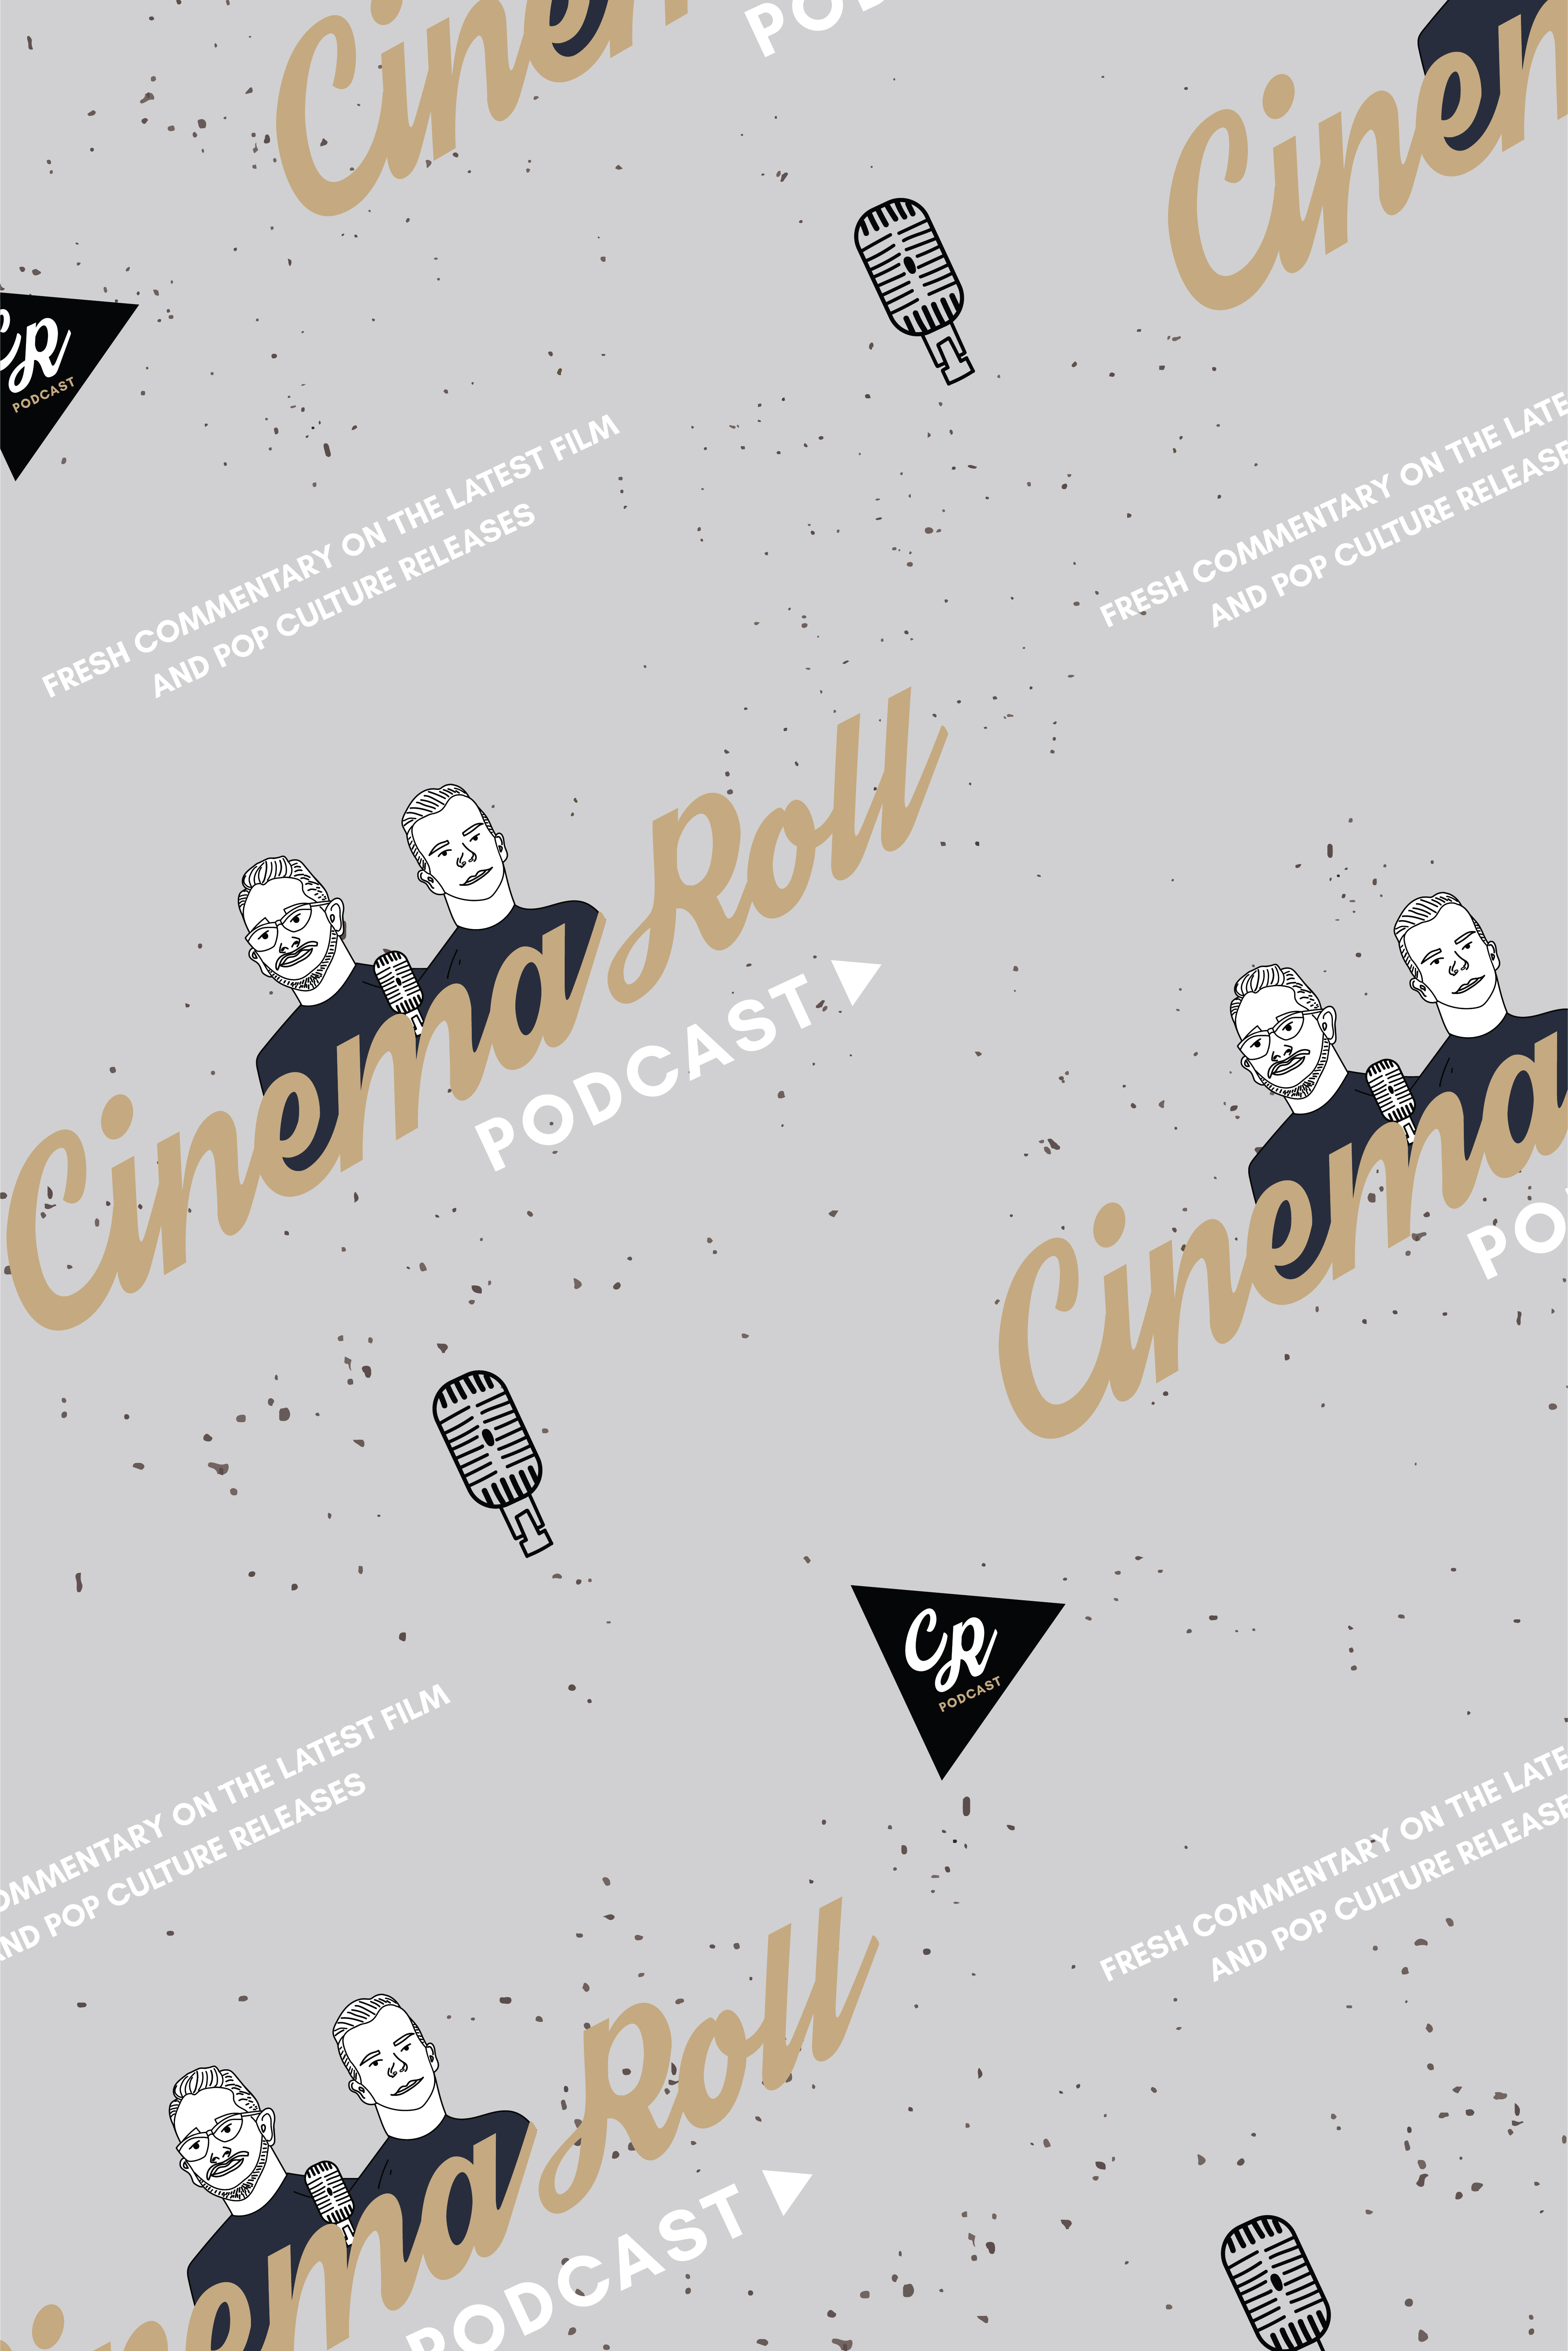 Brand design pattern for the Cinema Roll Podcast by Fort Worth-based brand designer, Victoria & Co.